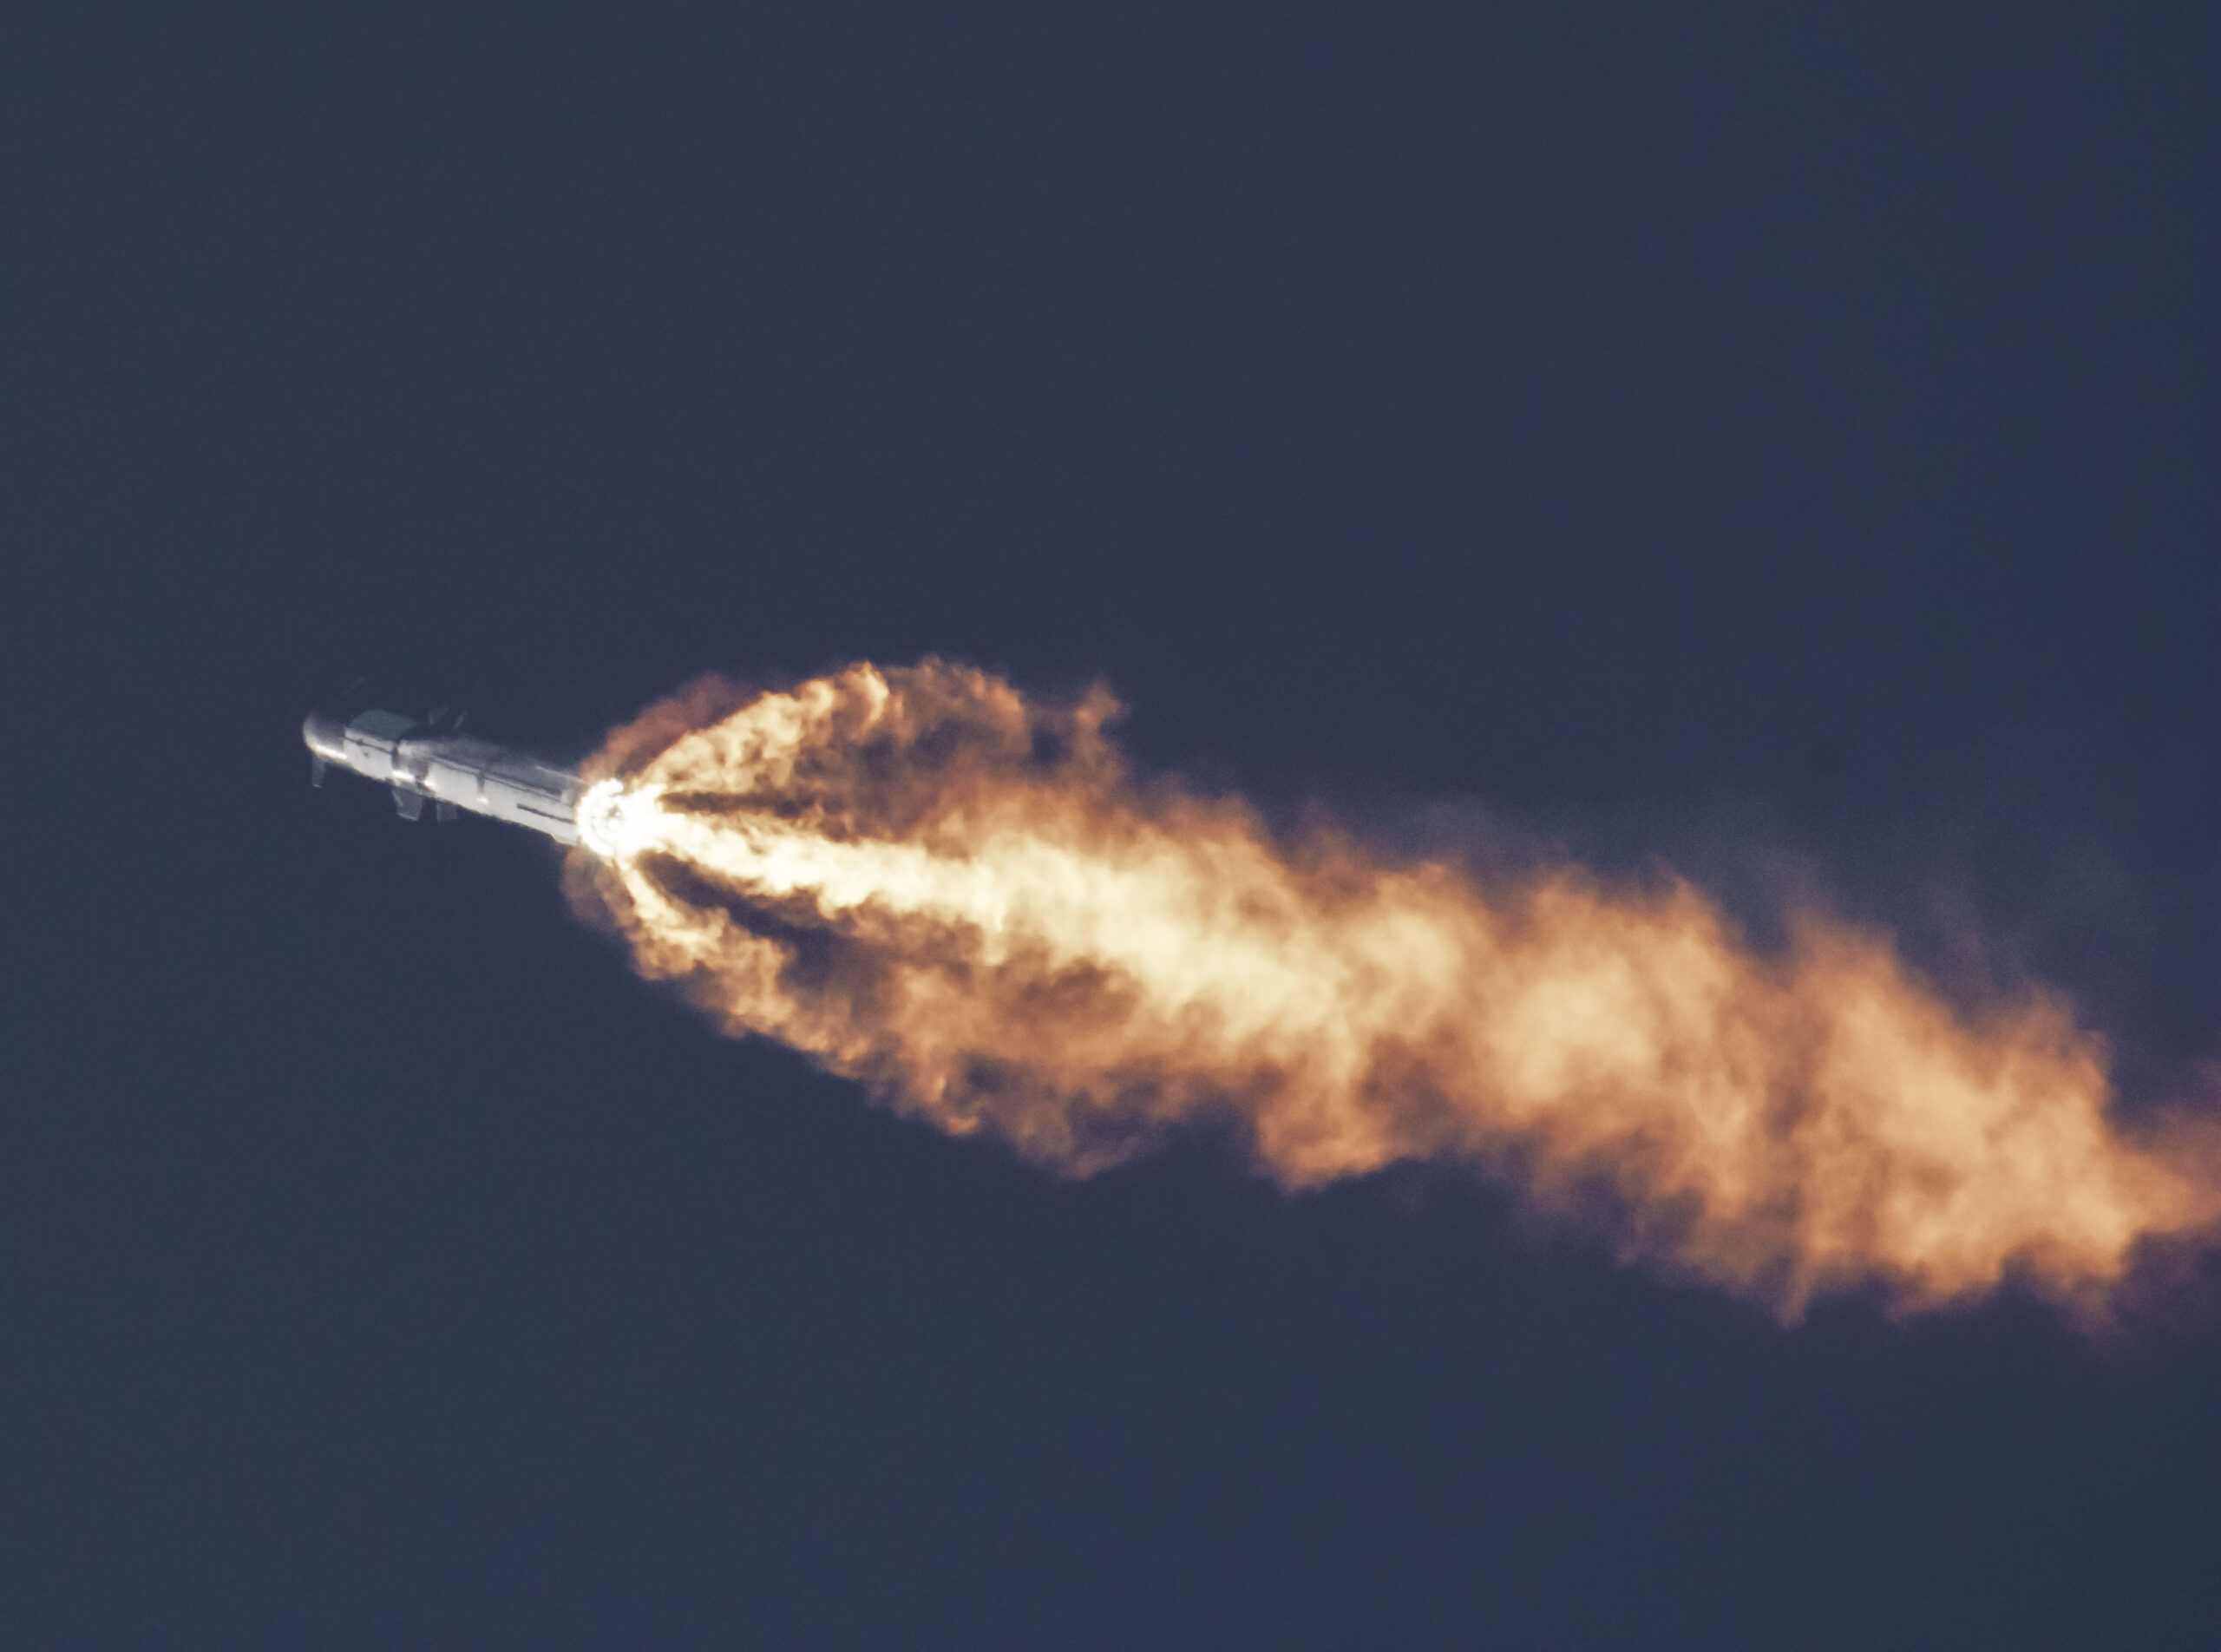 A SpaceX Starship rocket after launch.